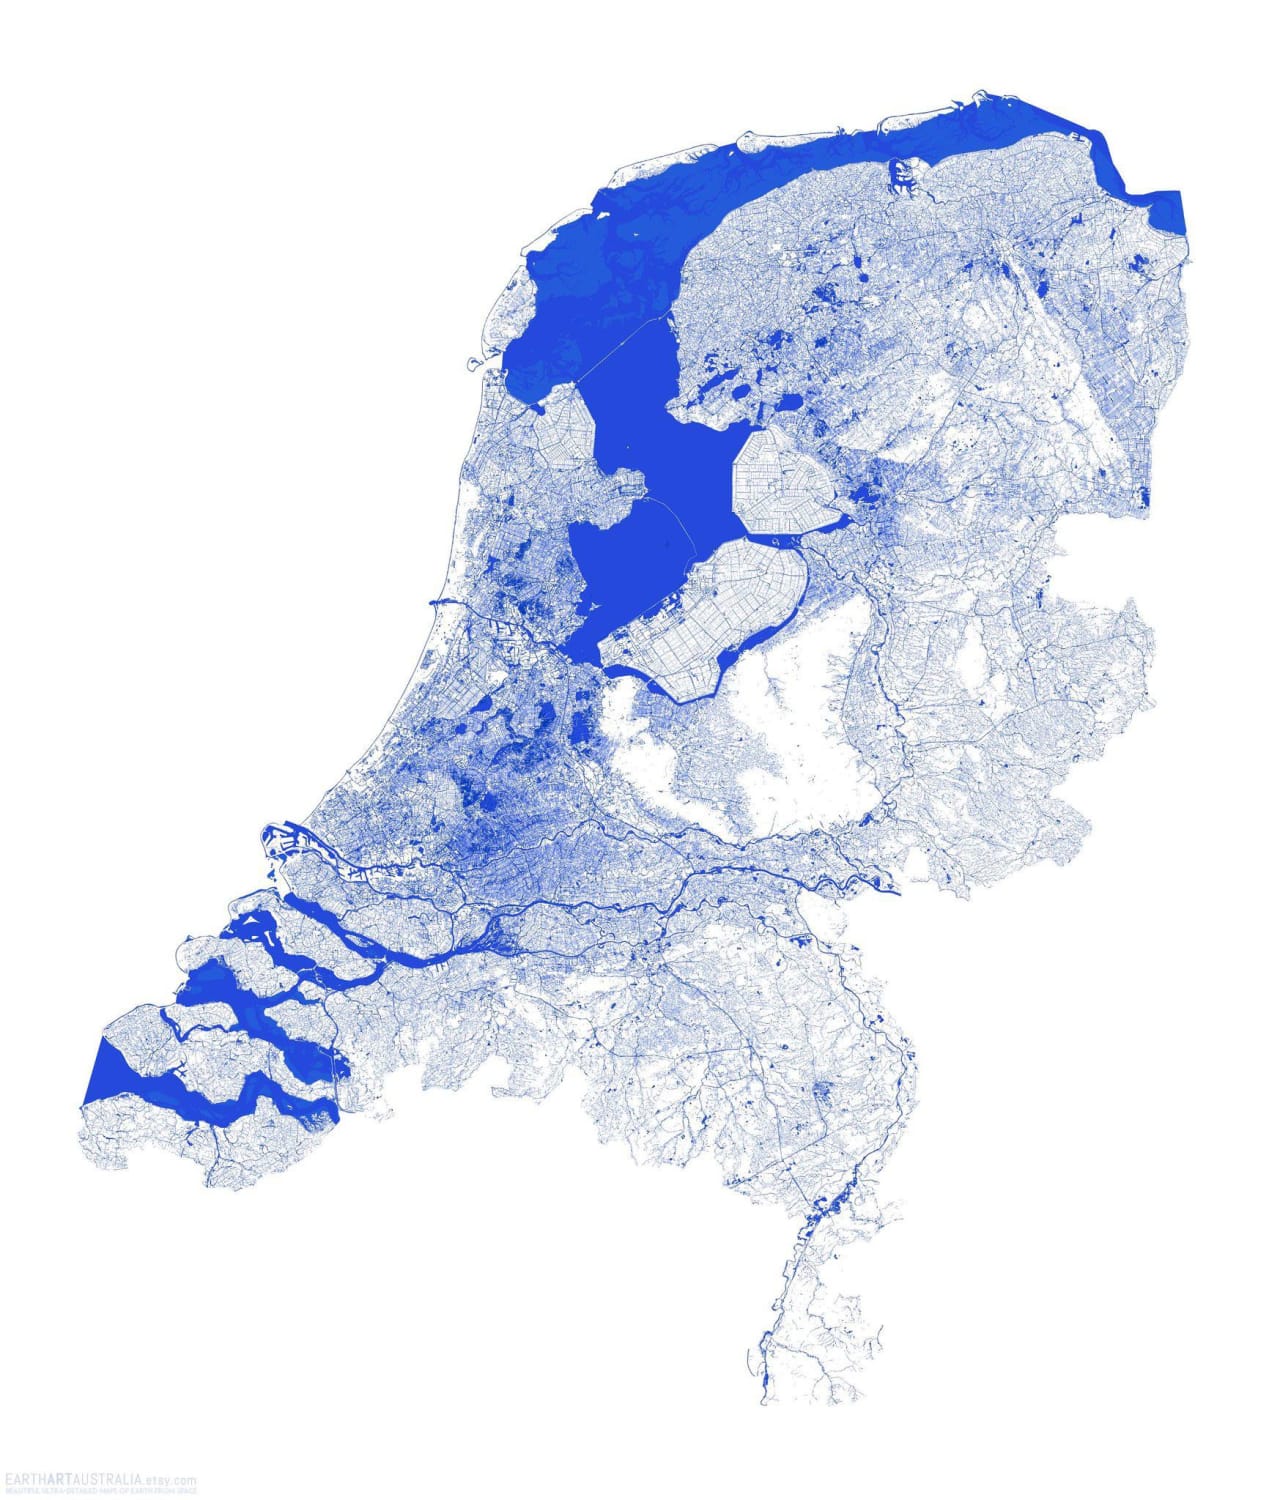 The Netherlands. Where 26% of the land, containing 4 million citizens is below the sea level and where the lowest point is 6.76m (21.9ft) below sea level.